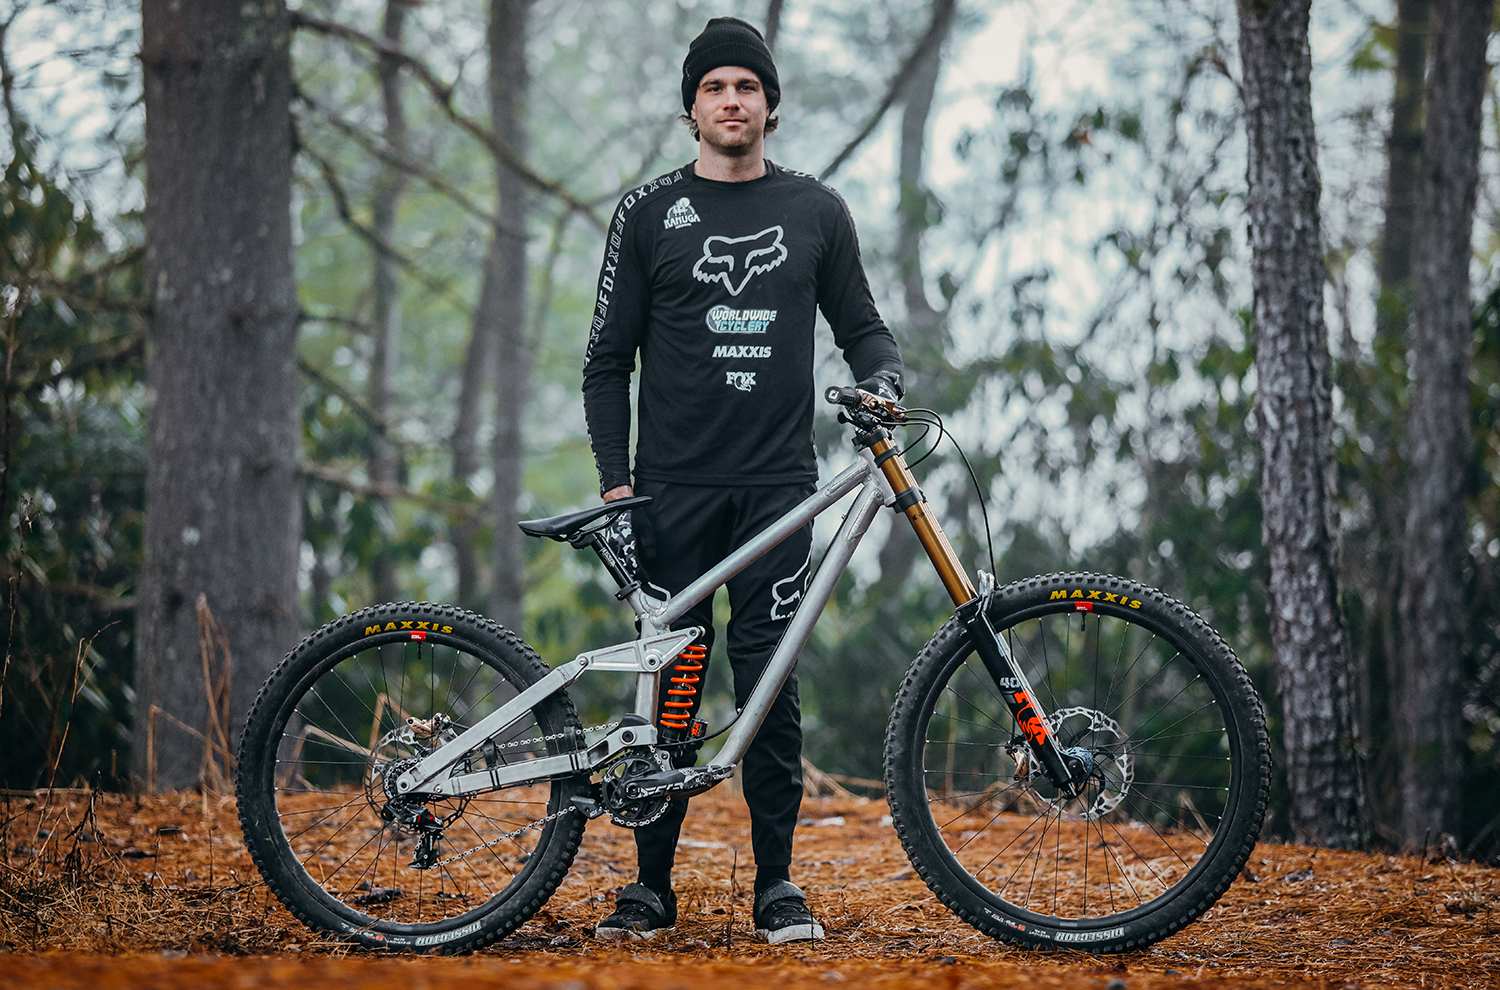 When we heard that Neko Mulally was planning on racing the 2022 World Cup season on a bike he designed himself, we had to get him on Bikes & Big Ideas to talk about how he decided to take on such an ambitious project; designing the bike(s) and working with Frank The Welder to build them; starting his own team; and a whole lot more.